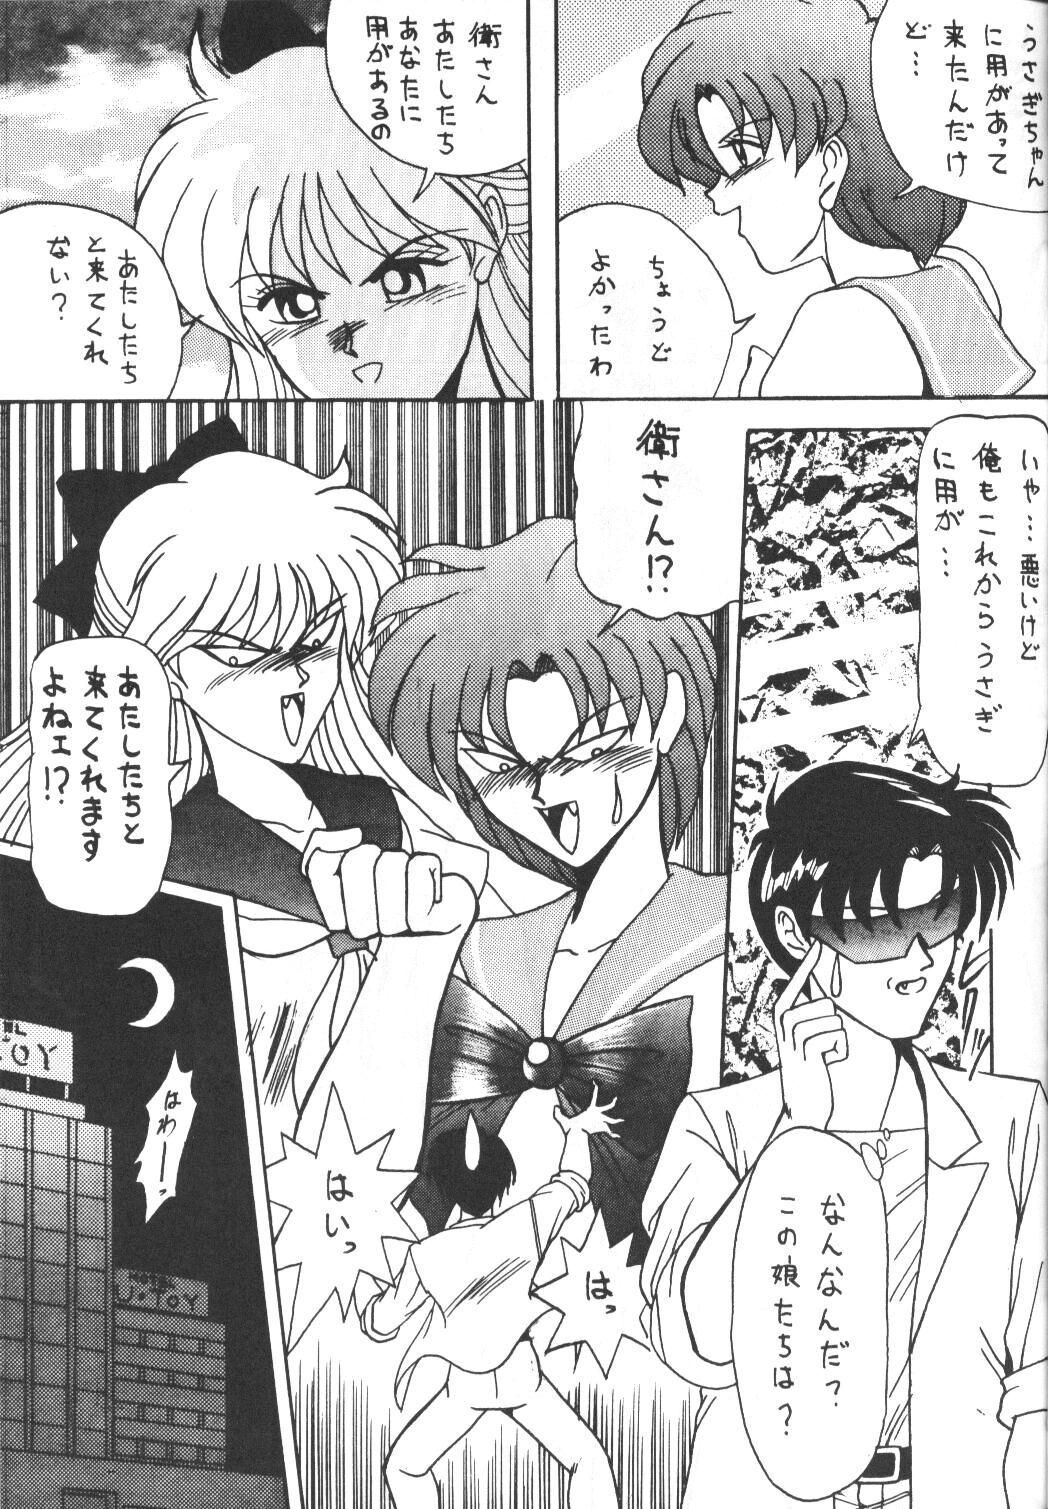 Missionary Position Porn Make Up 2 - Sailor moon Arabic - Page 11